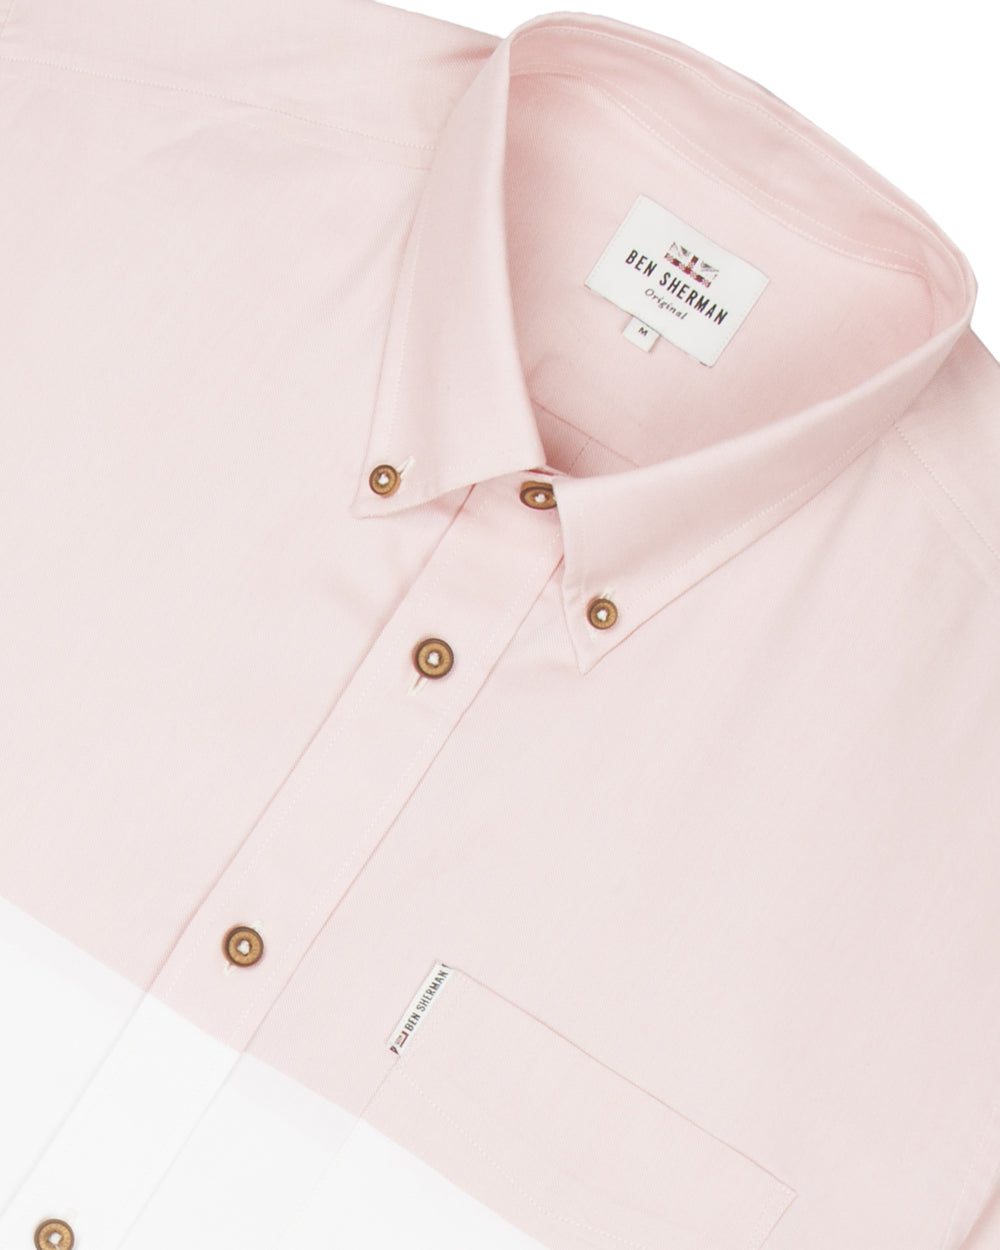 Long-Sleeve Pink White & Blue Striped Oxford Shirt - Pink